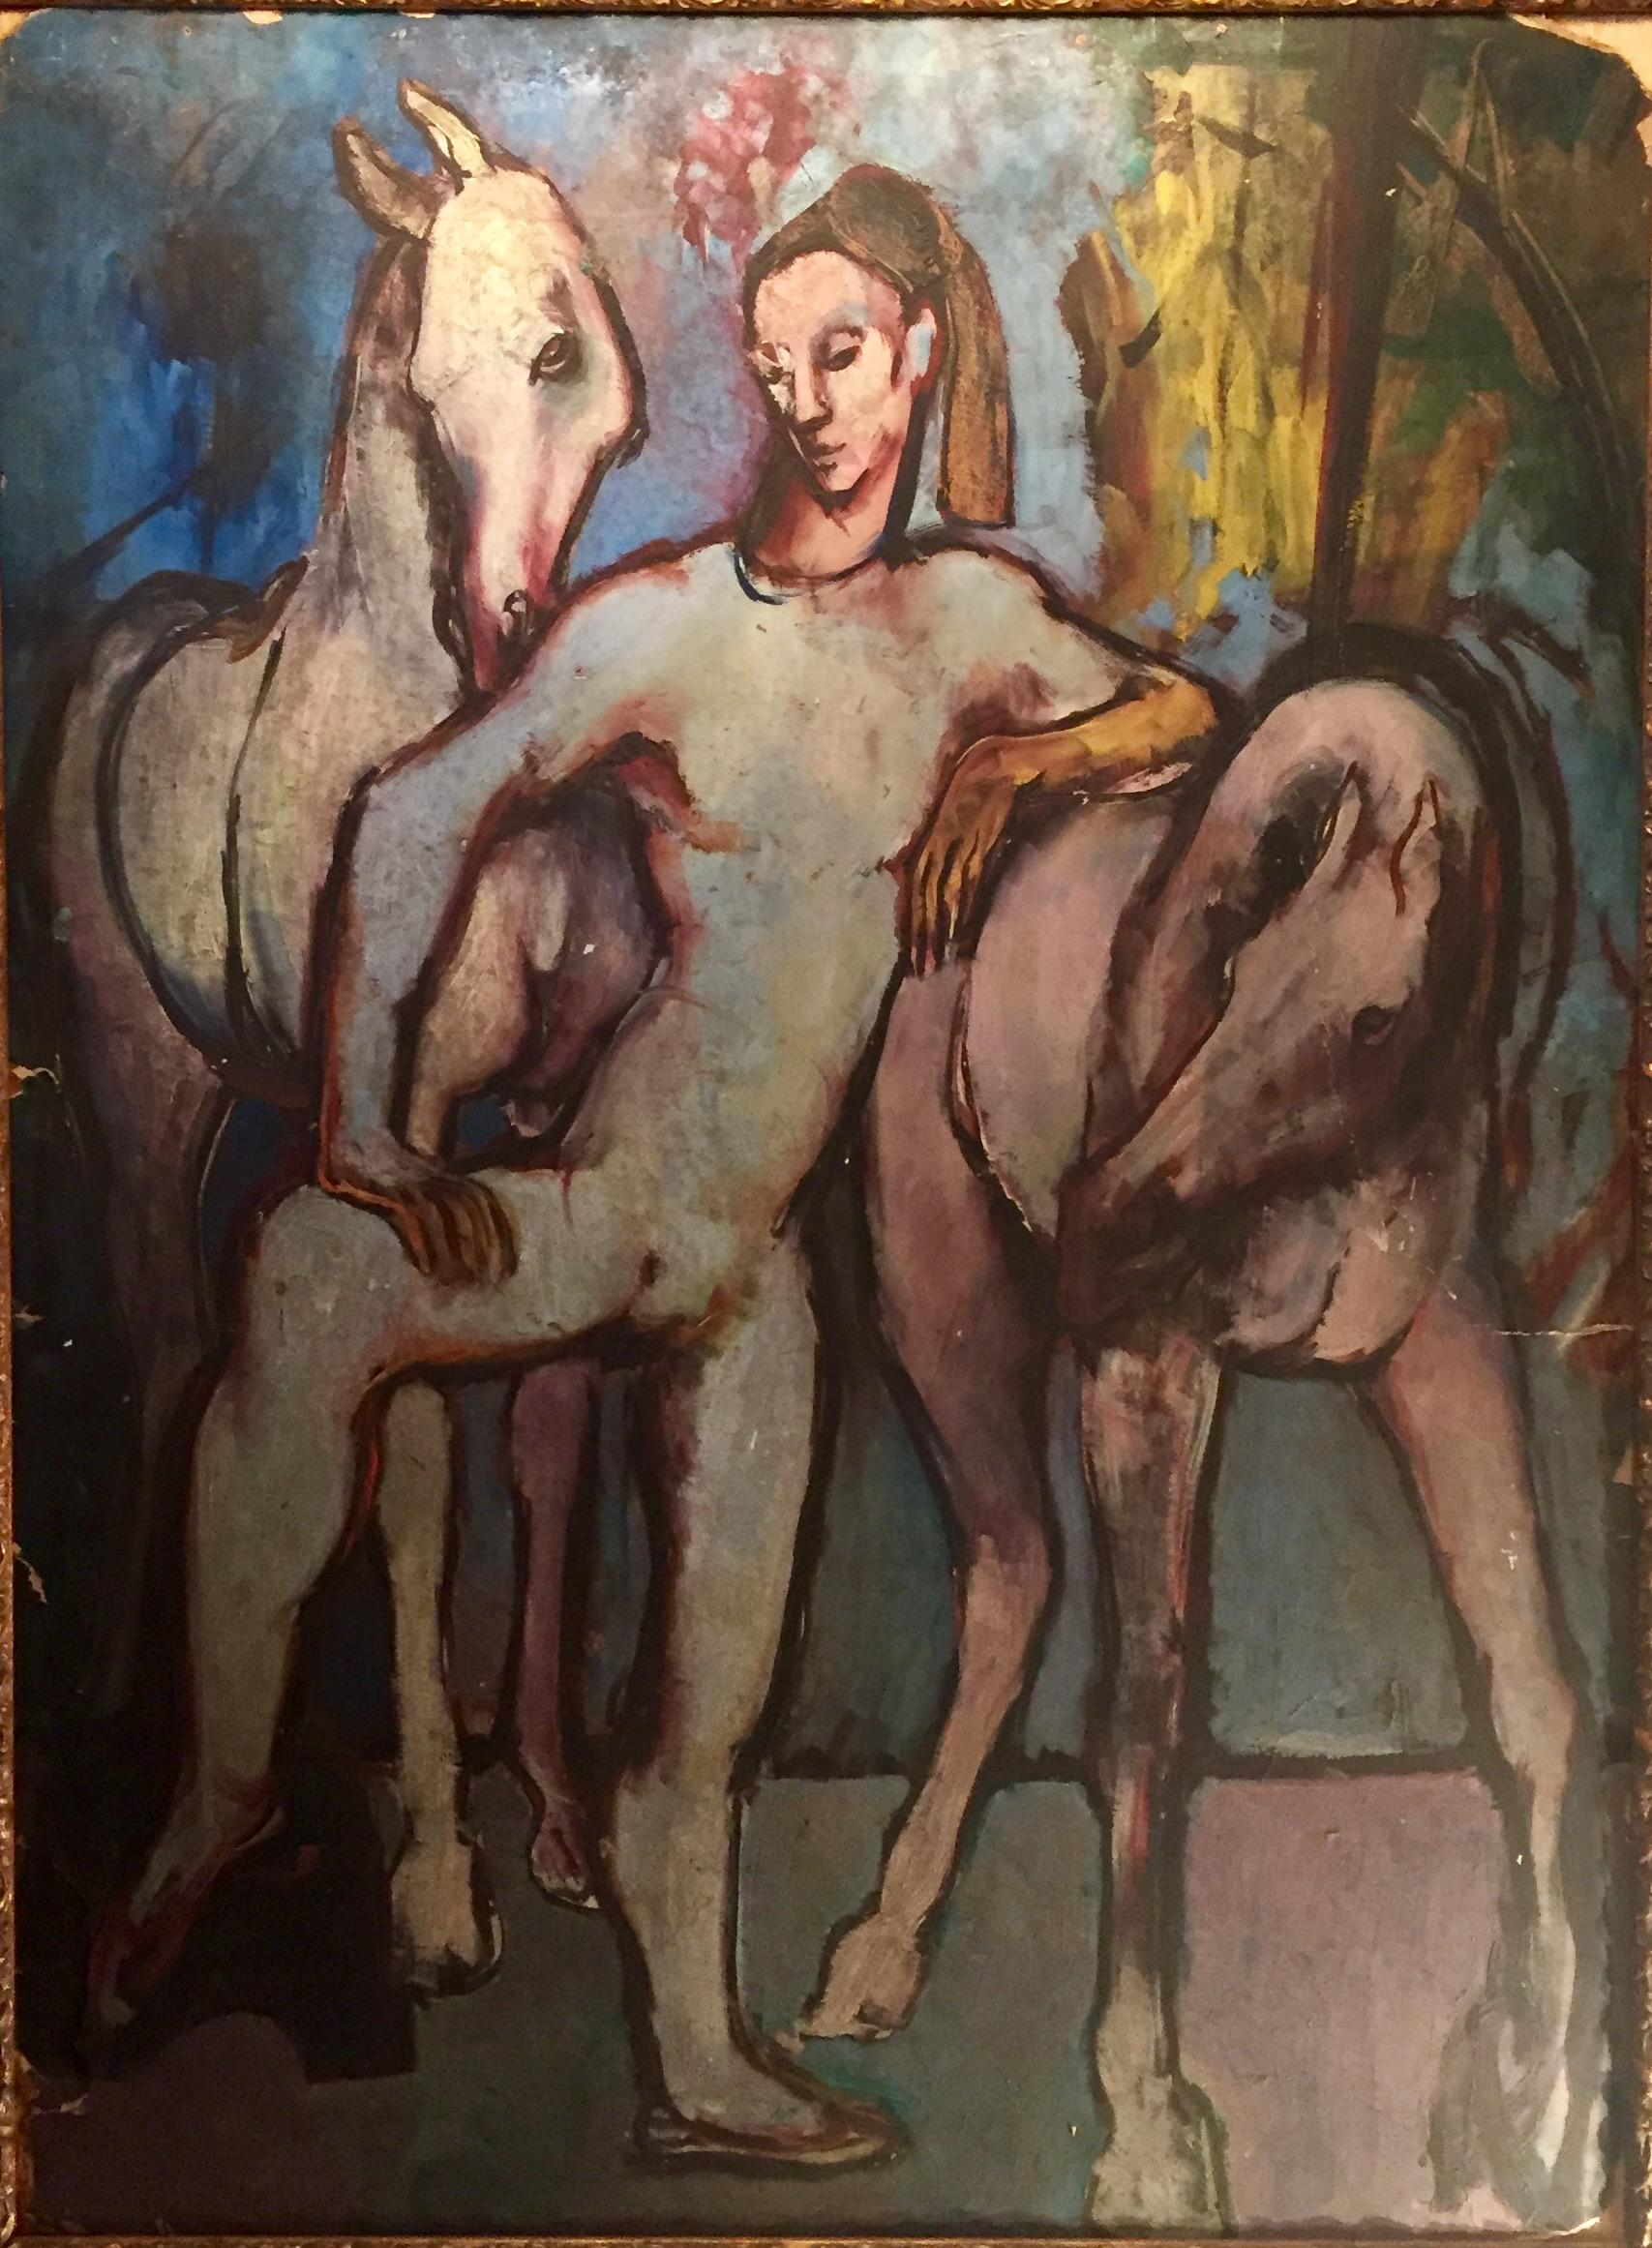 This is a masterfully painted work in the style of Picasso’s Rose period. It leans on the famous painting, “Boy Leading a Horse”. Executed in oil on artist cardboard, circa 1910. The harlequin or carnival performer is a pleasant theme. The painting